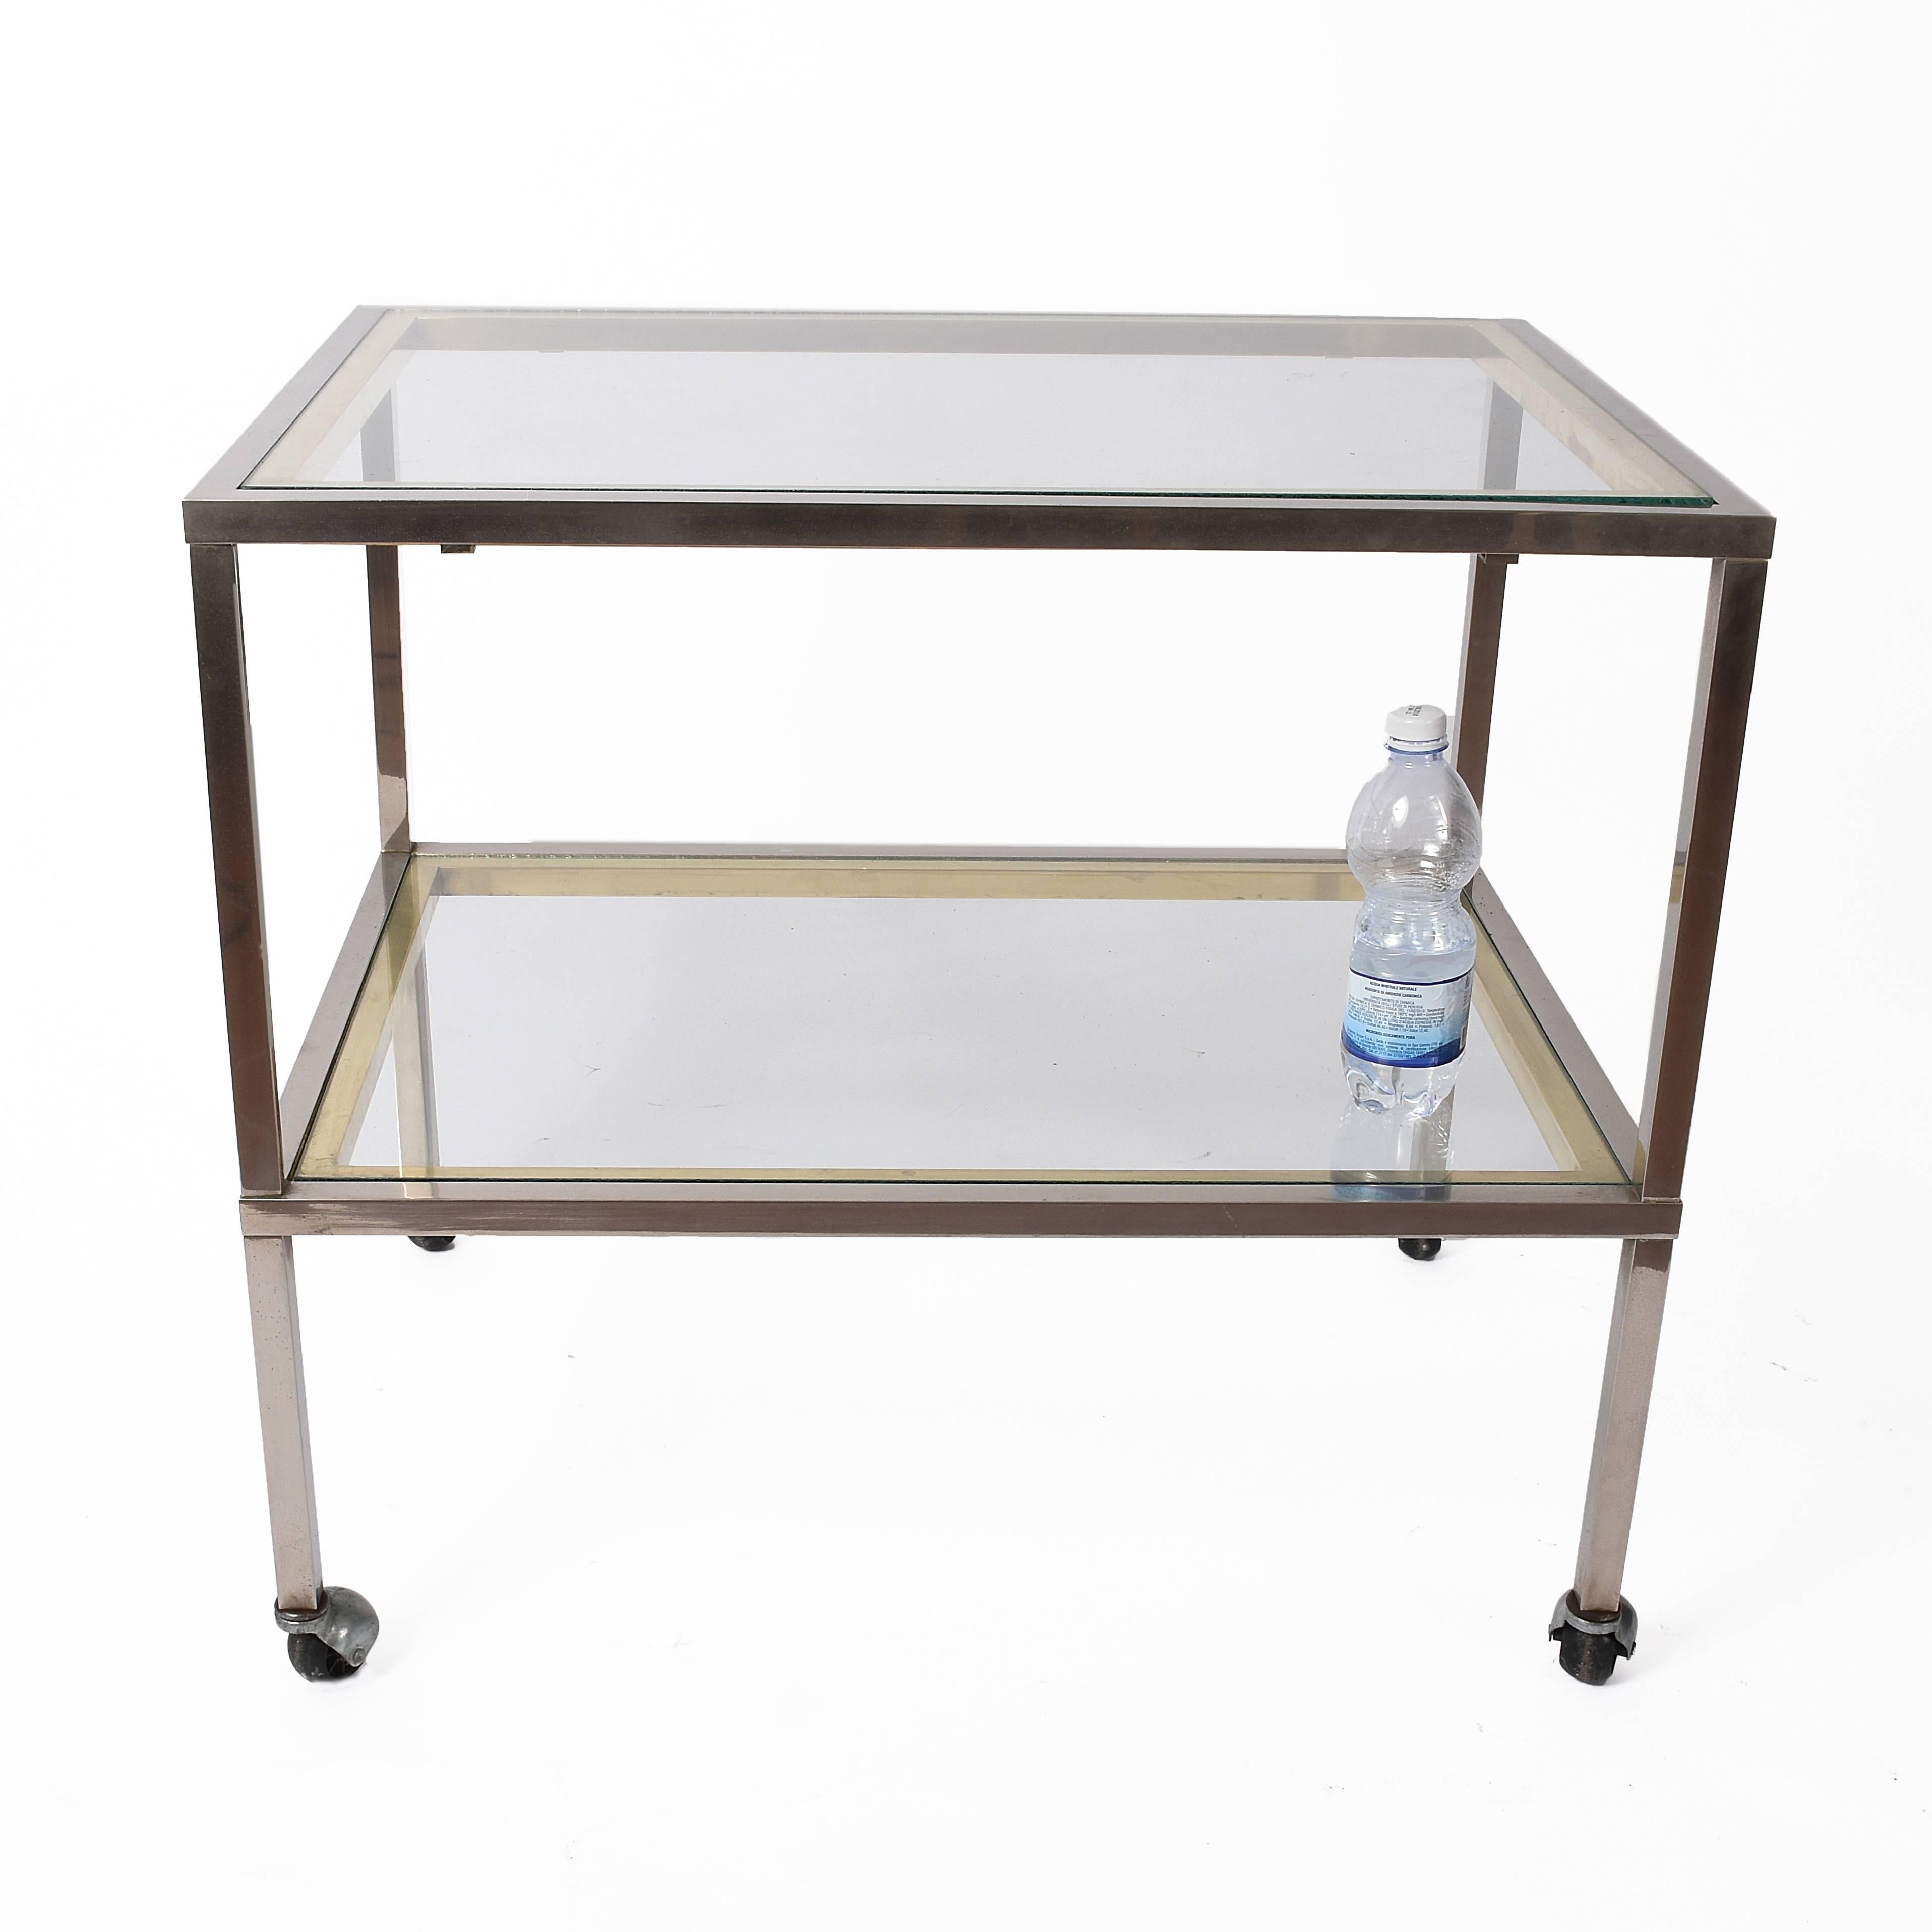 Beautiful trolley bar with a linear design and it has the typical made in Italy design of the 1970s.

The trolley has two glass shelves on a chrome and brass structure with glass shelves and it is attributable to Romeo Rega.

You will love the